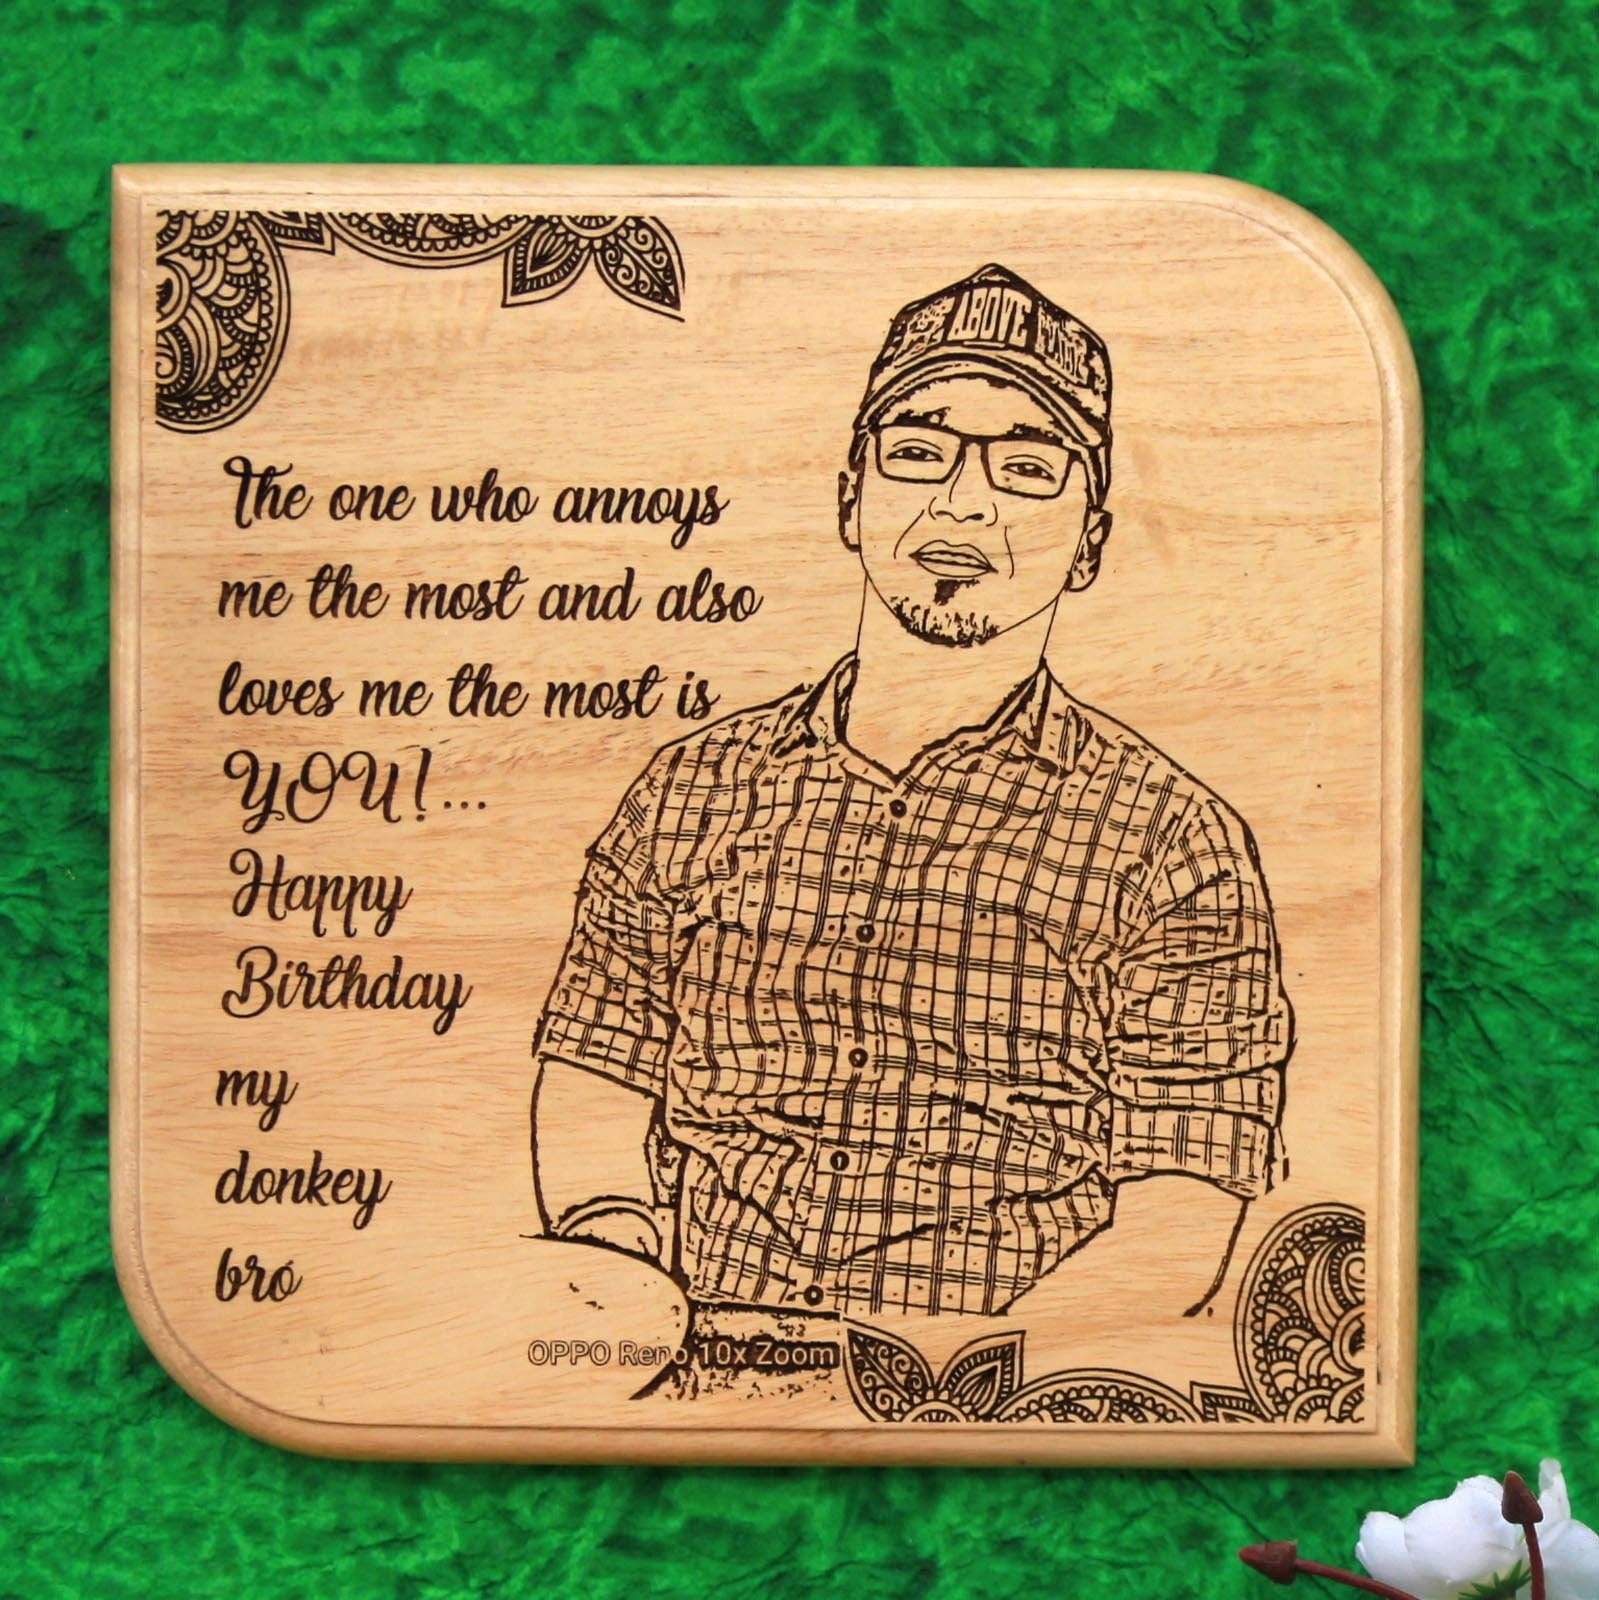 The One Who Annoys Me The Most & Also Loves Me The Most Is YOU. Happy Birthday My Donkey Bro! This Wooden Plaque is a great personalized birthday gift for brother